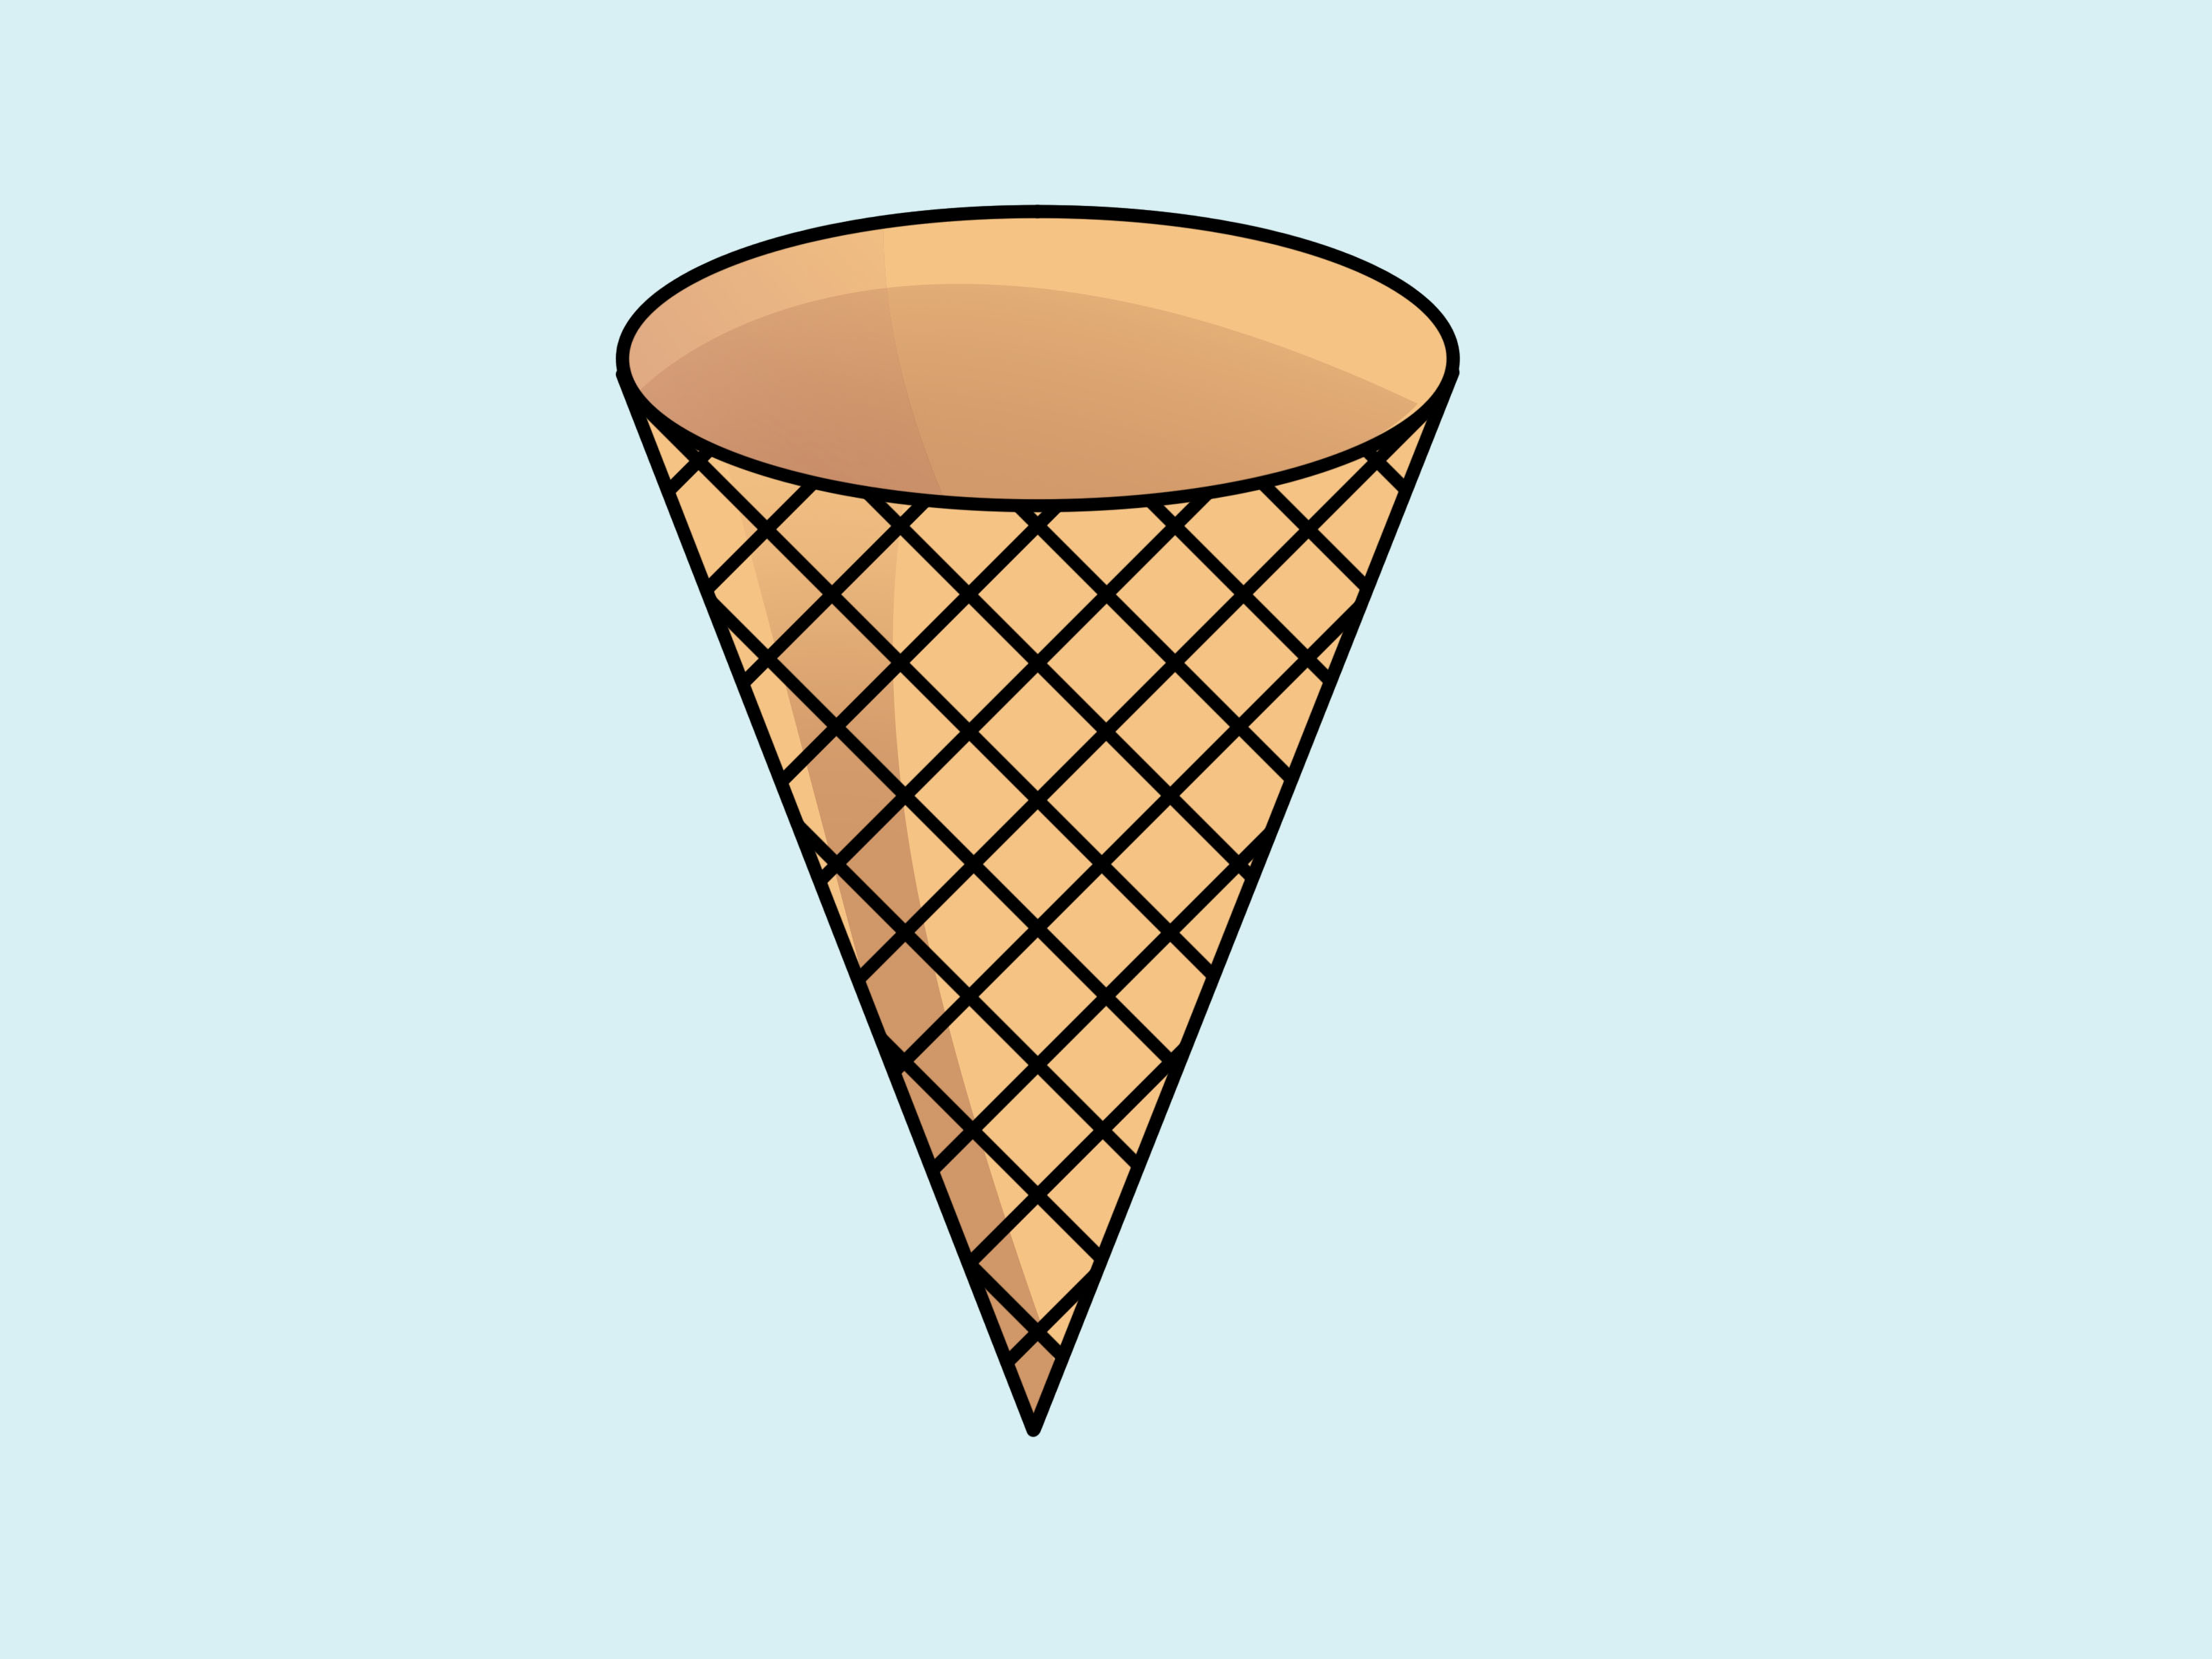 free-pictures-of-an-ice-cream-cone-download-free-pictures-of-an-ice